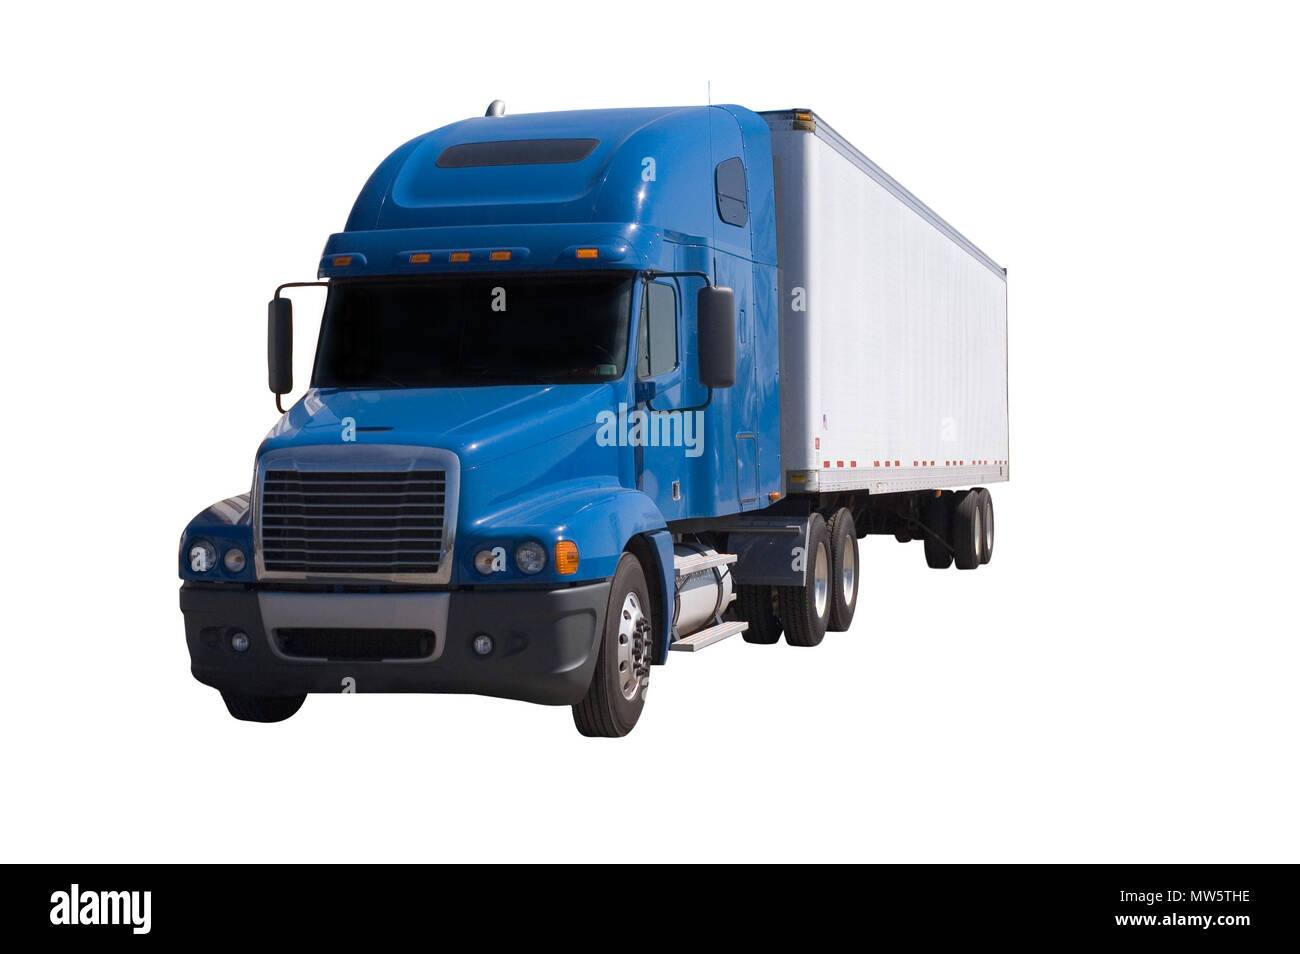 A blue semi truck with a white trailer attached. Isolated on a white background. Clipping path included. Stock Photo